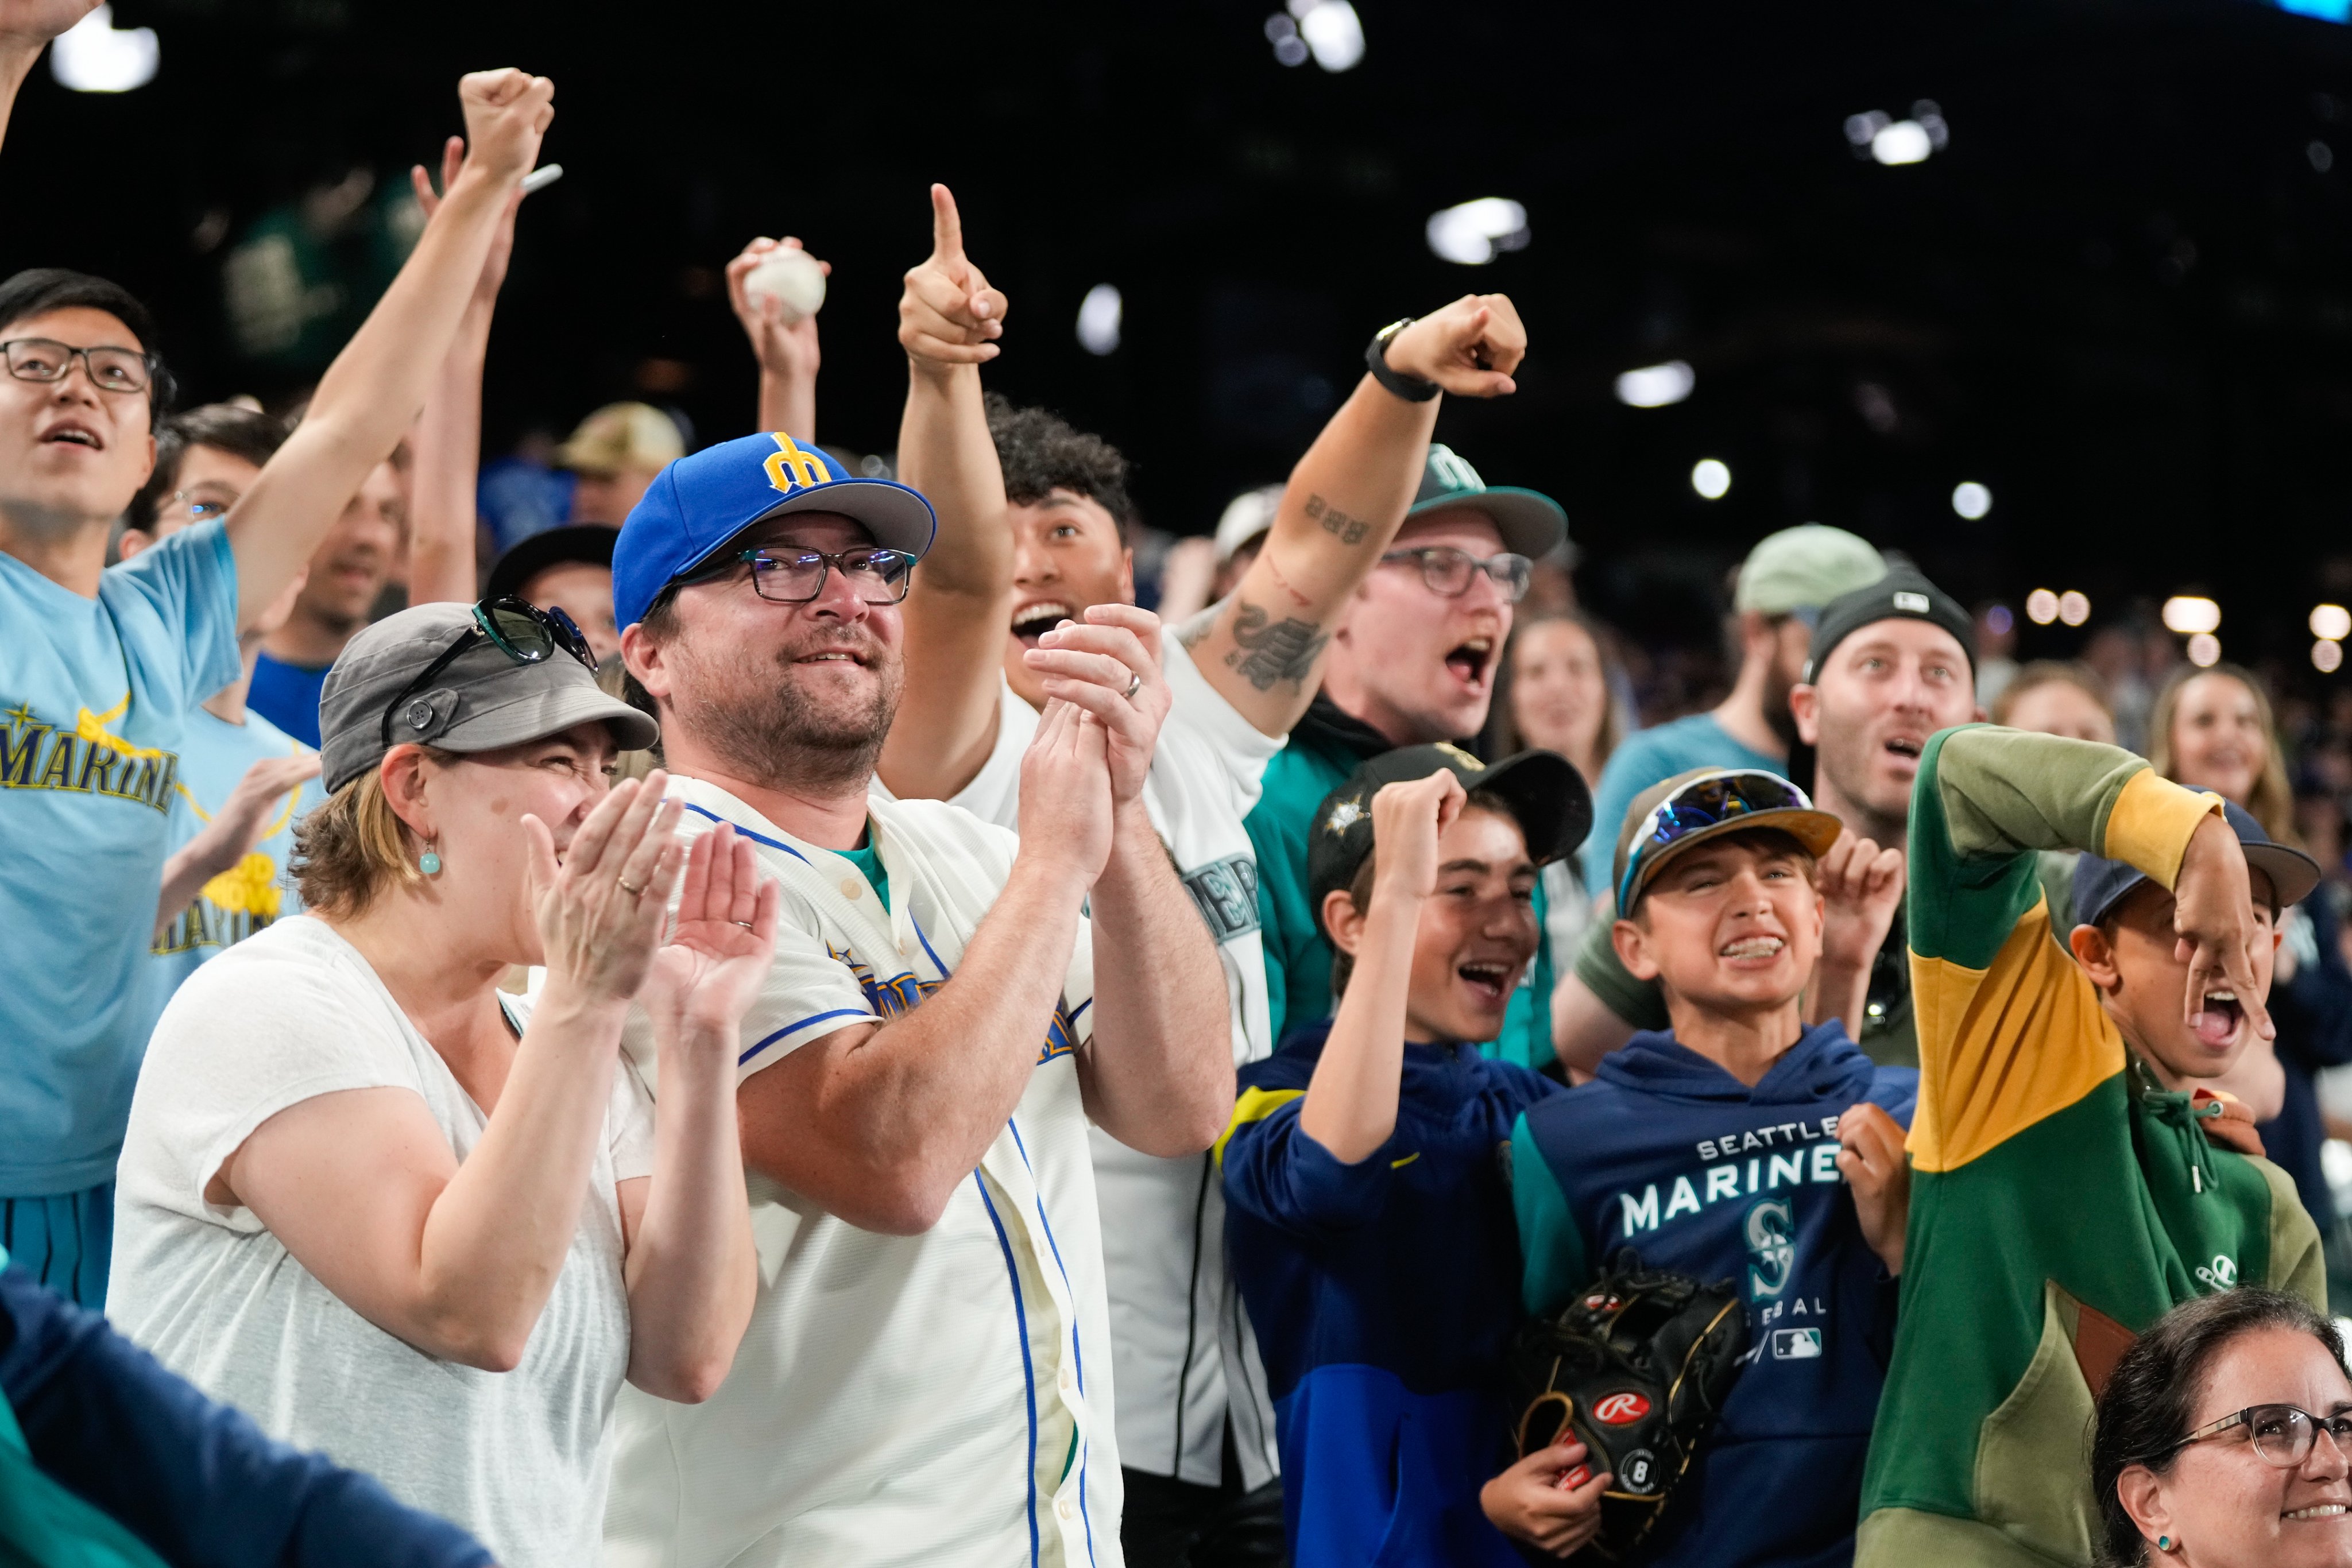 This place is an Electric Factory: You need this Seattle Mariners shirt